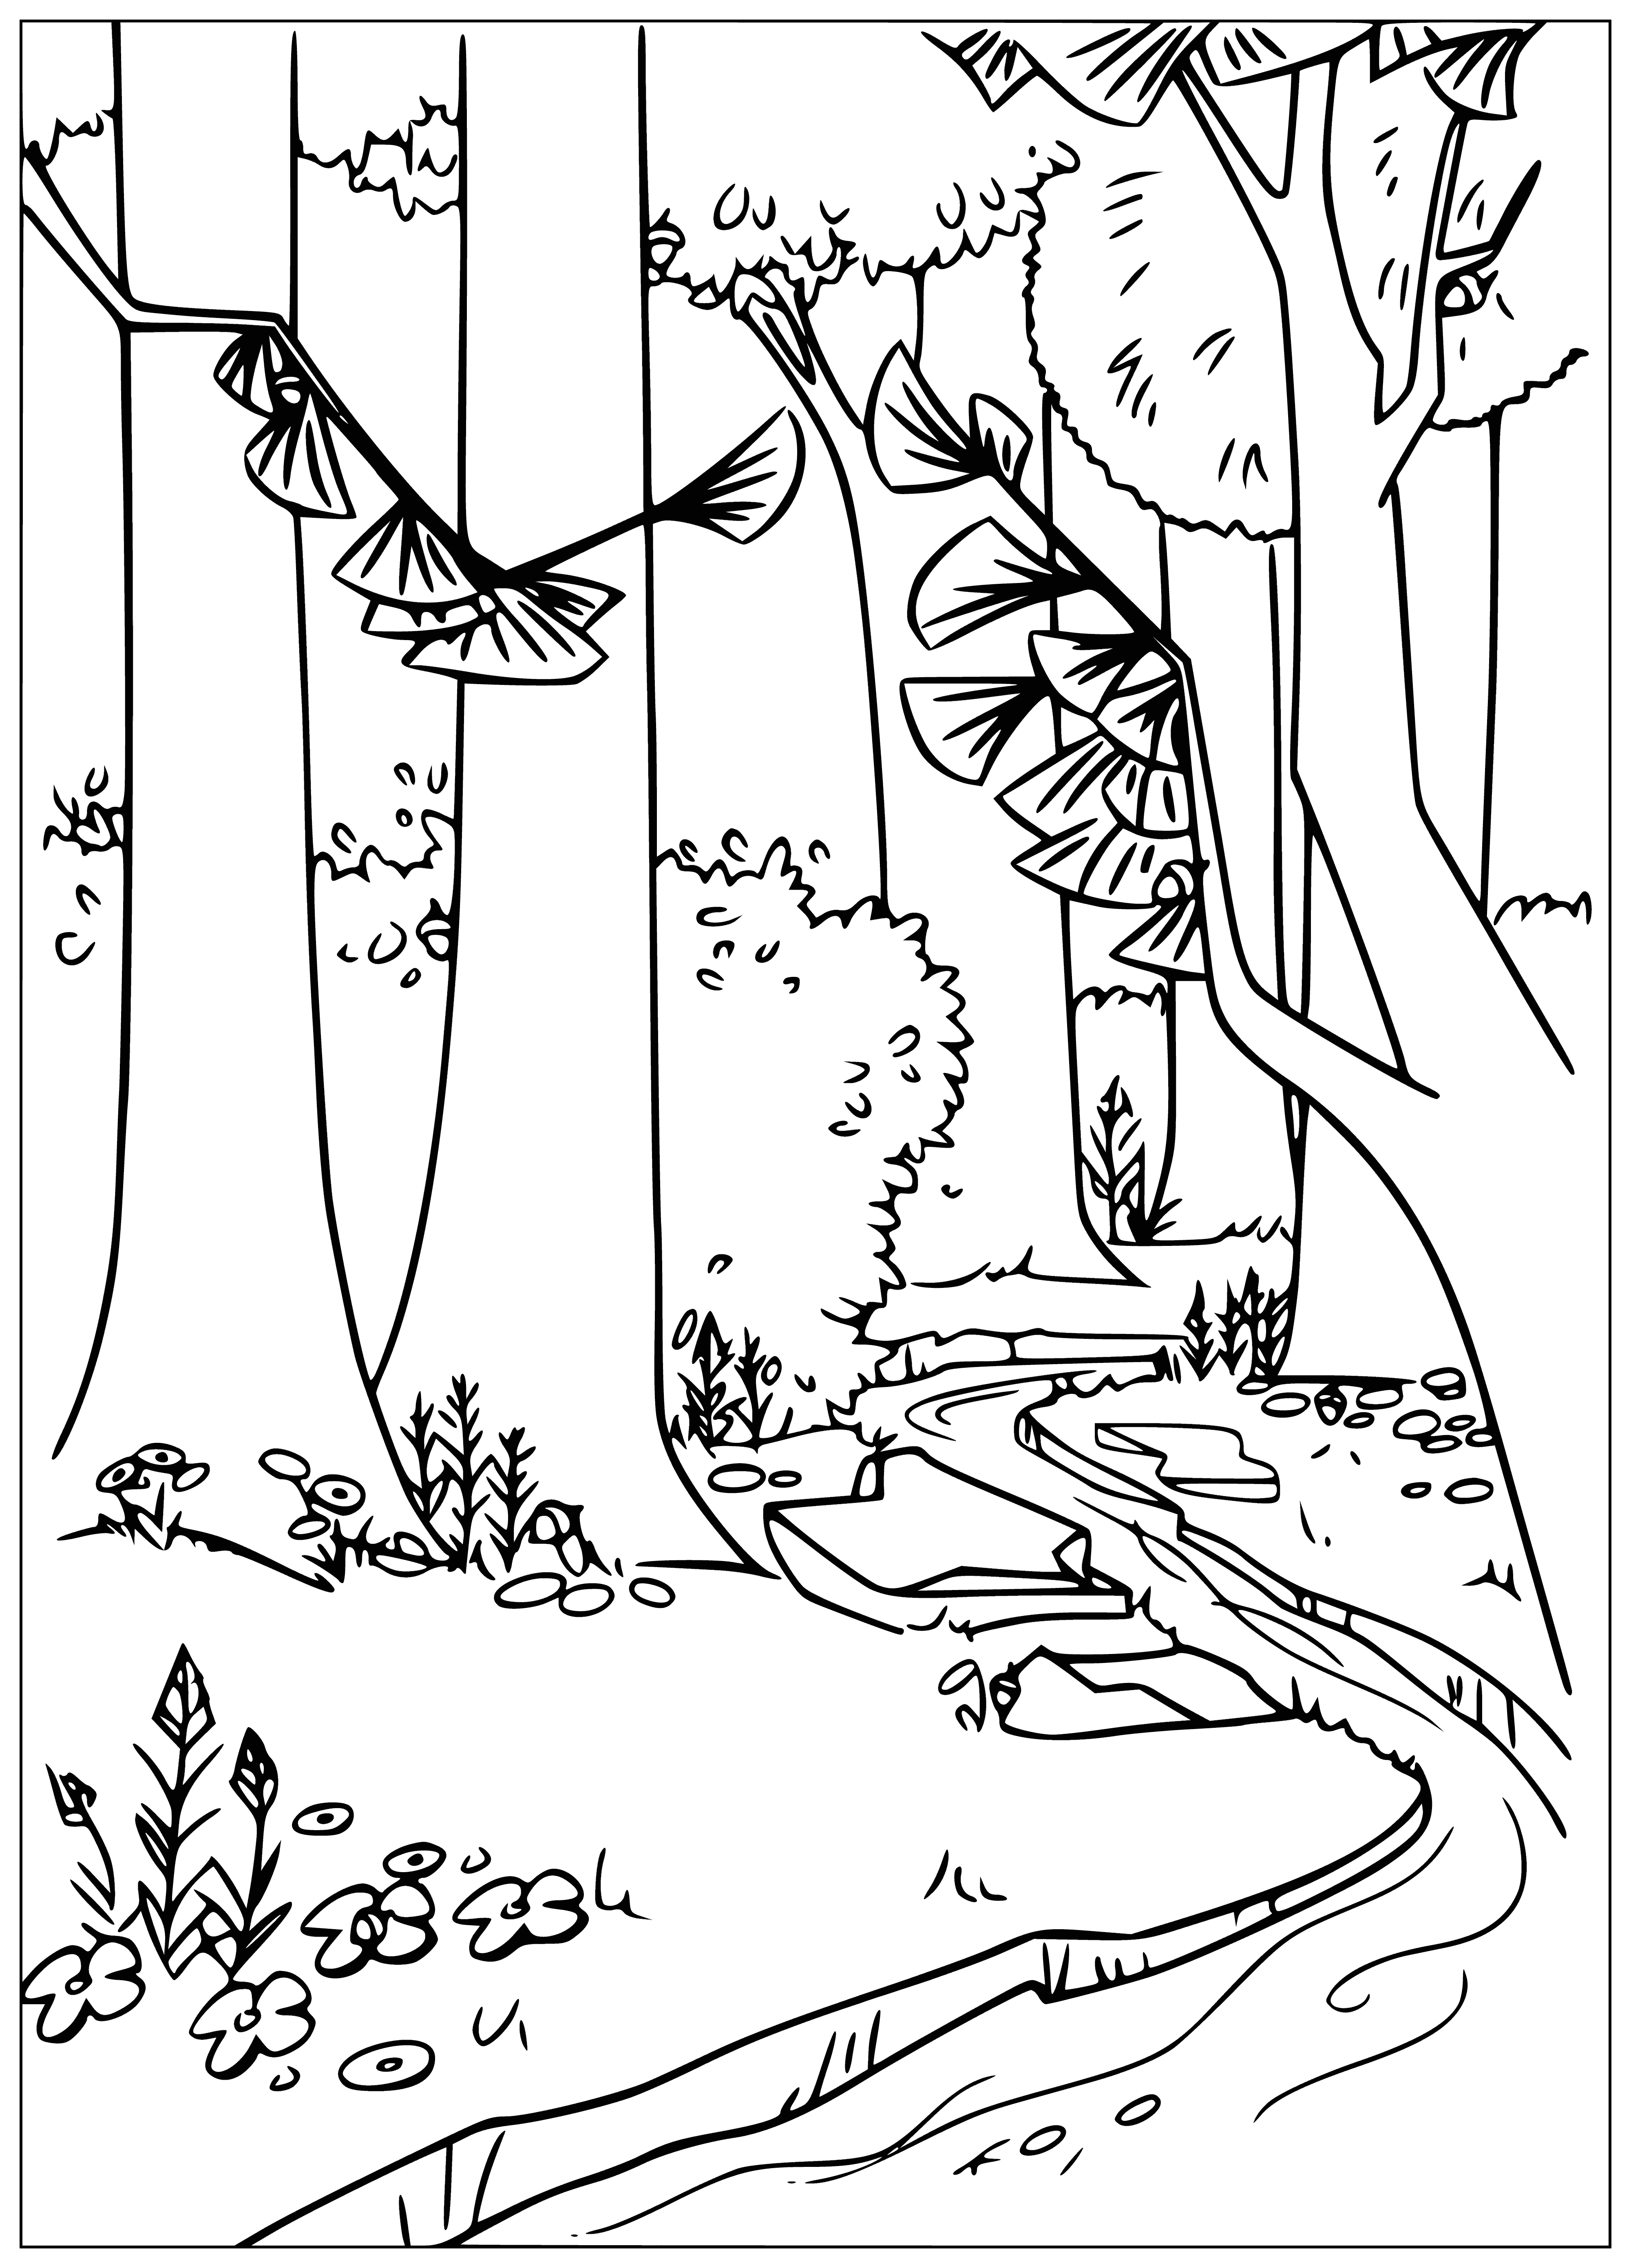 coloring page: Coloring page has a large tree, blue sky w/ white clouds, small hill w/ grass, 2 trees w/ green & yellow leaves & a fallen tree in the foreground.